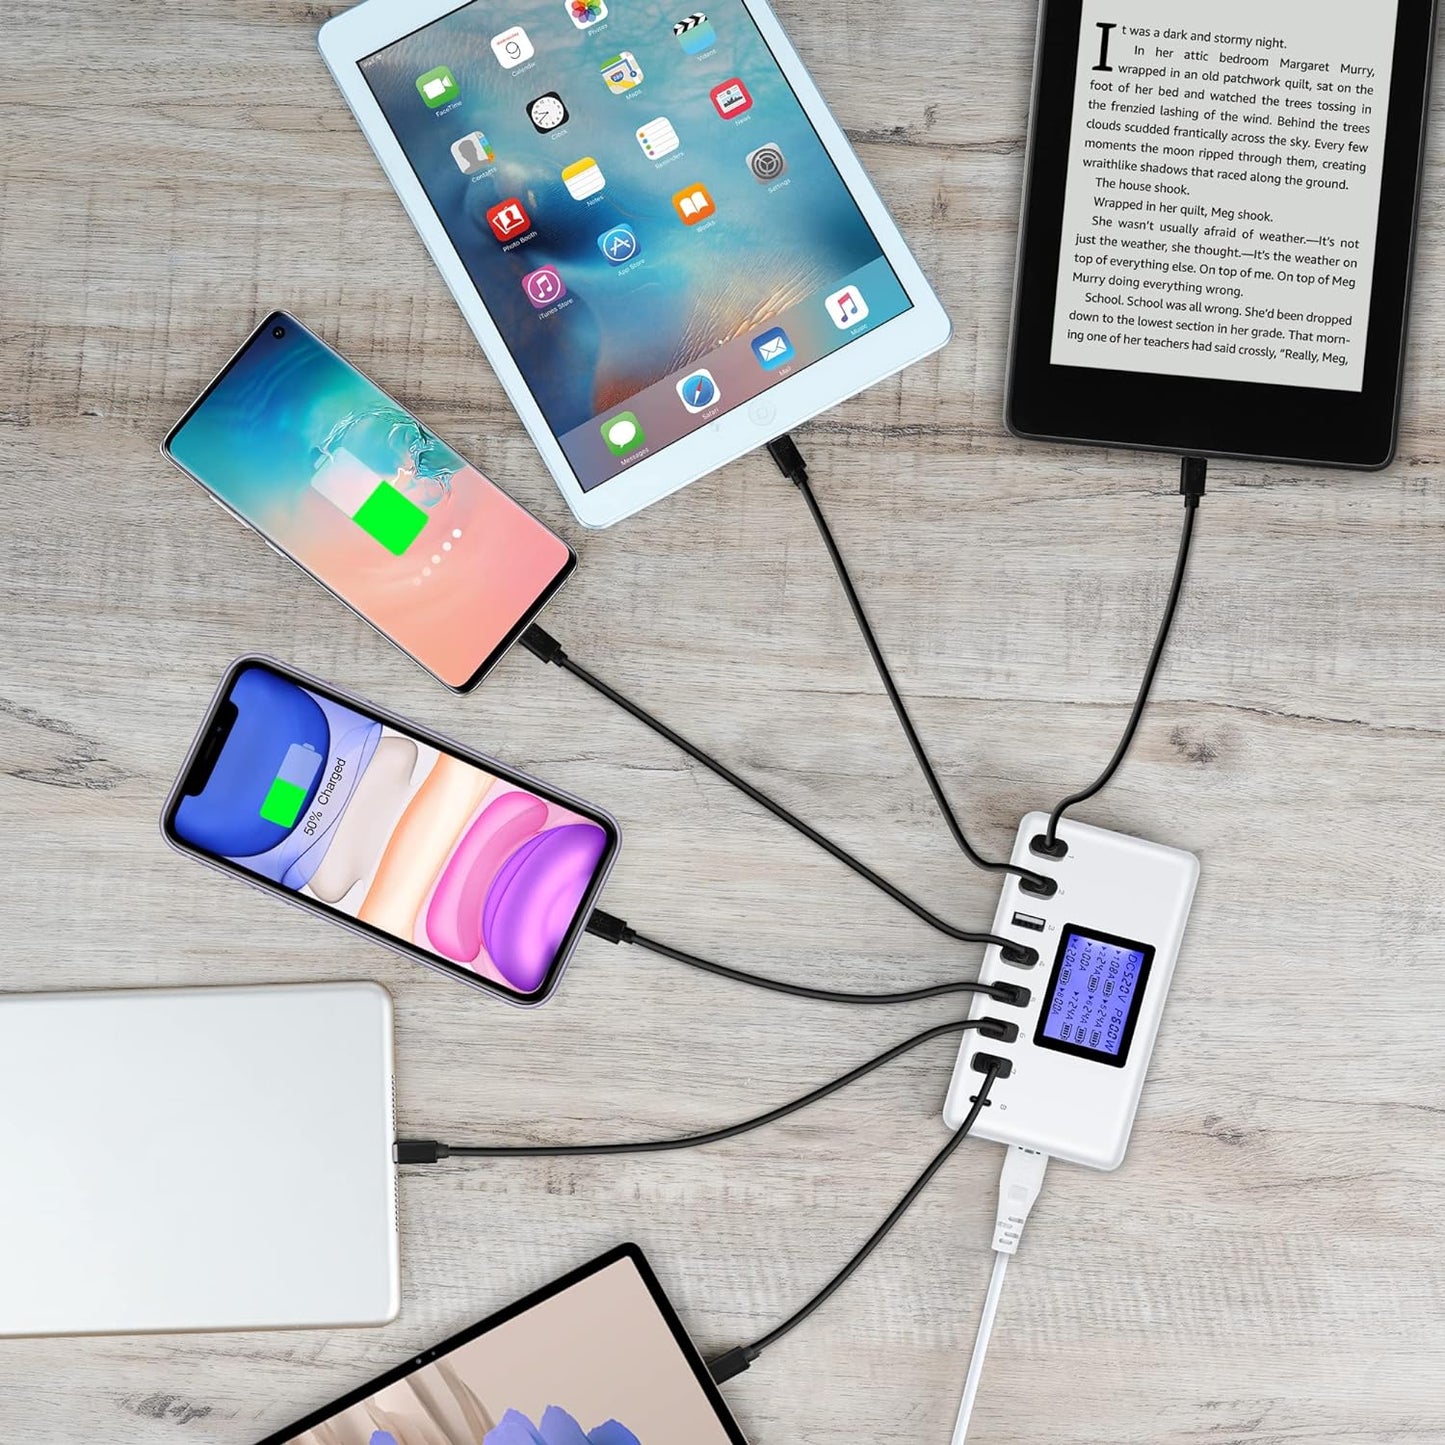 60W 12A 8-Port USB Charging Station Multi Port USB Hub Charger Compact Size LCD Display Compatible with iPhone iPad Samsung Kindle Tablet Bluetooth Earbuds and More